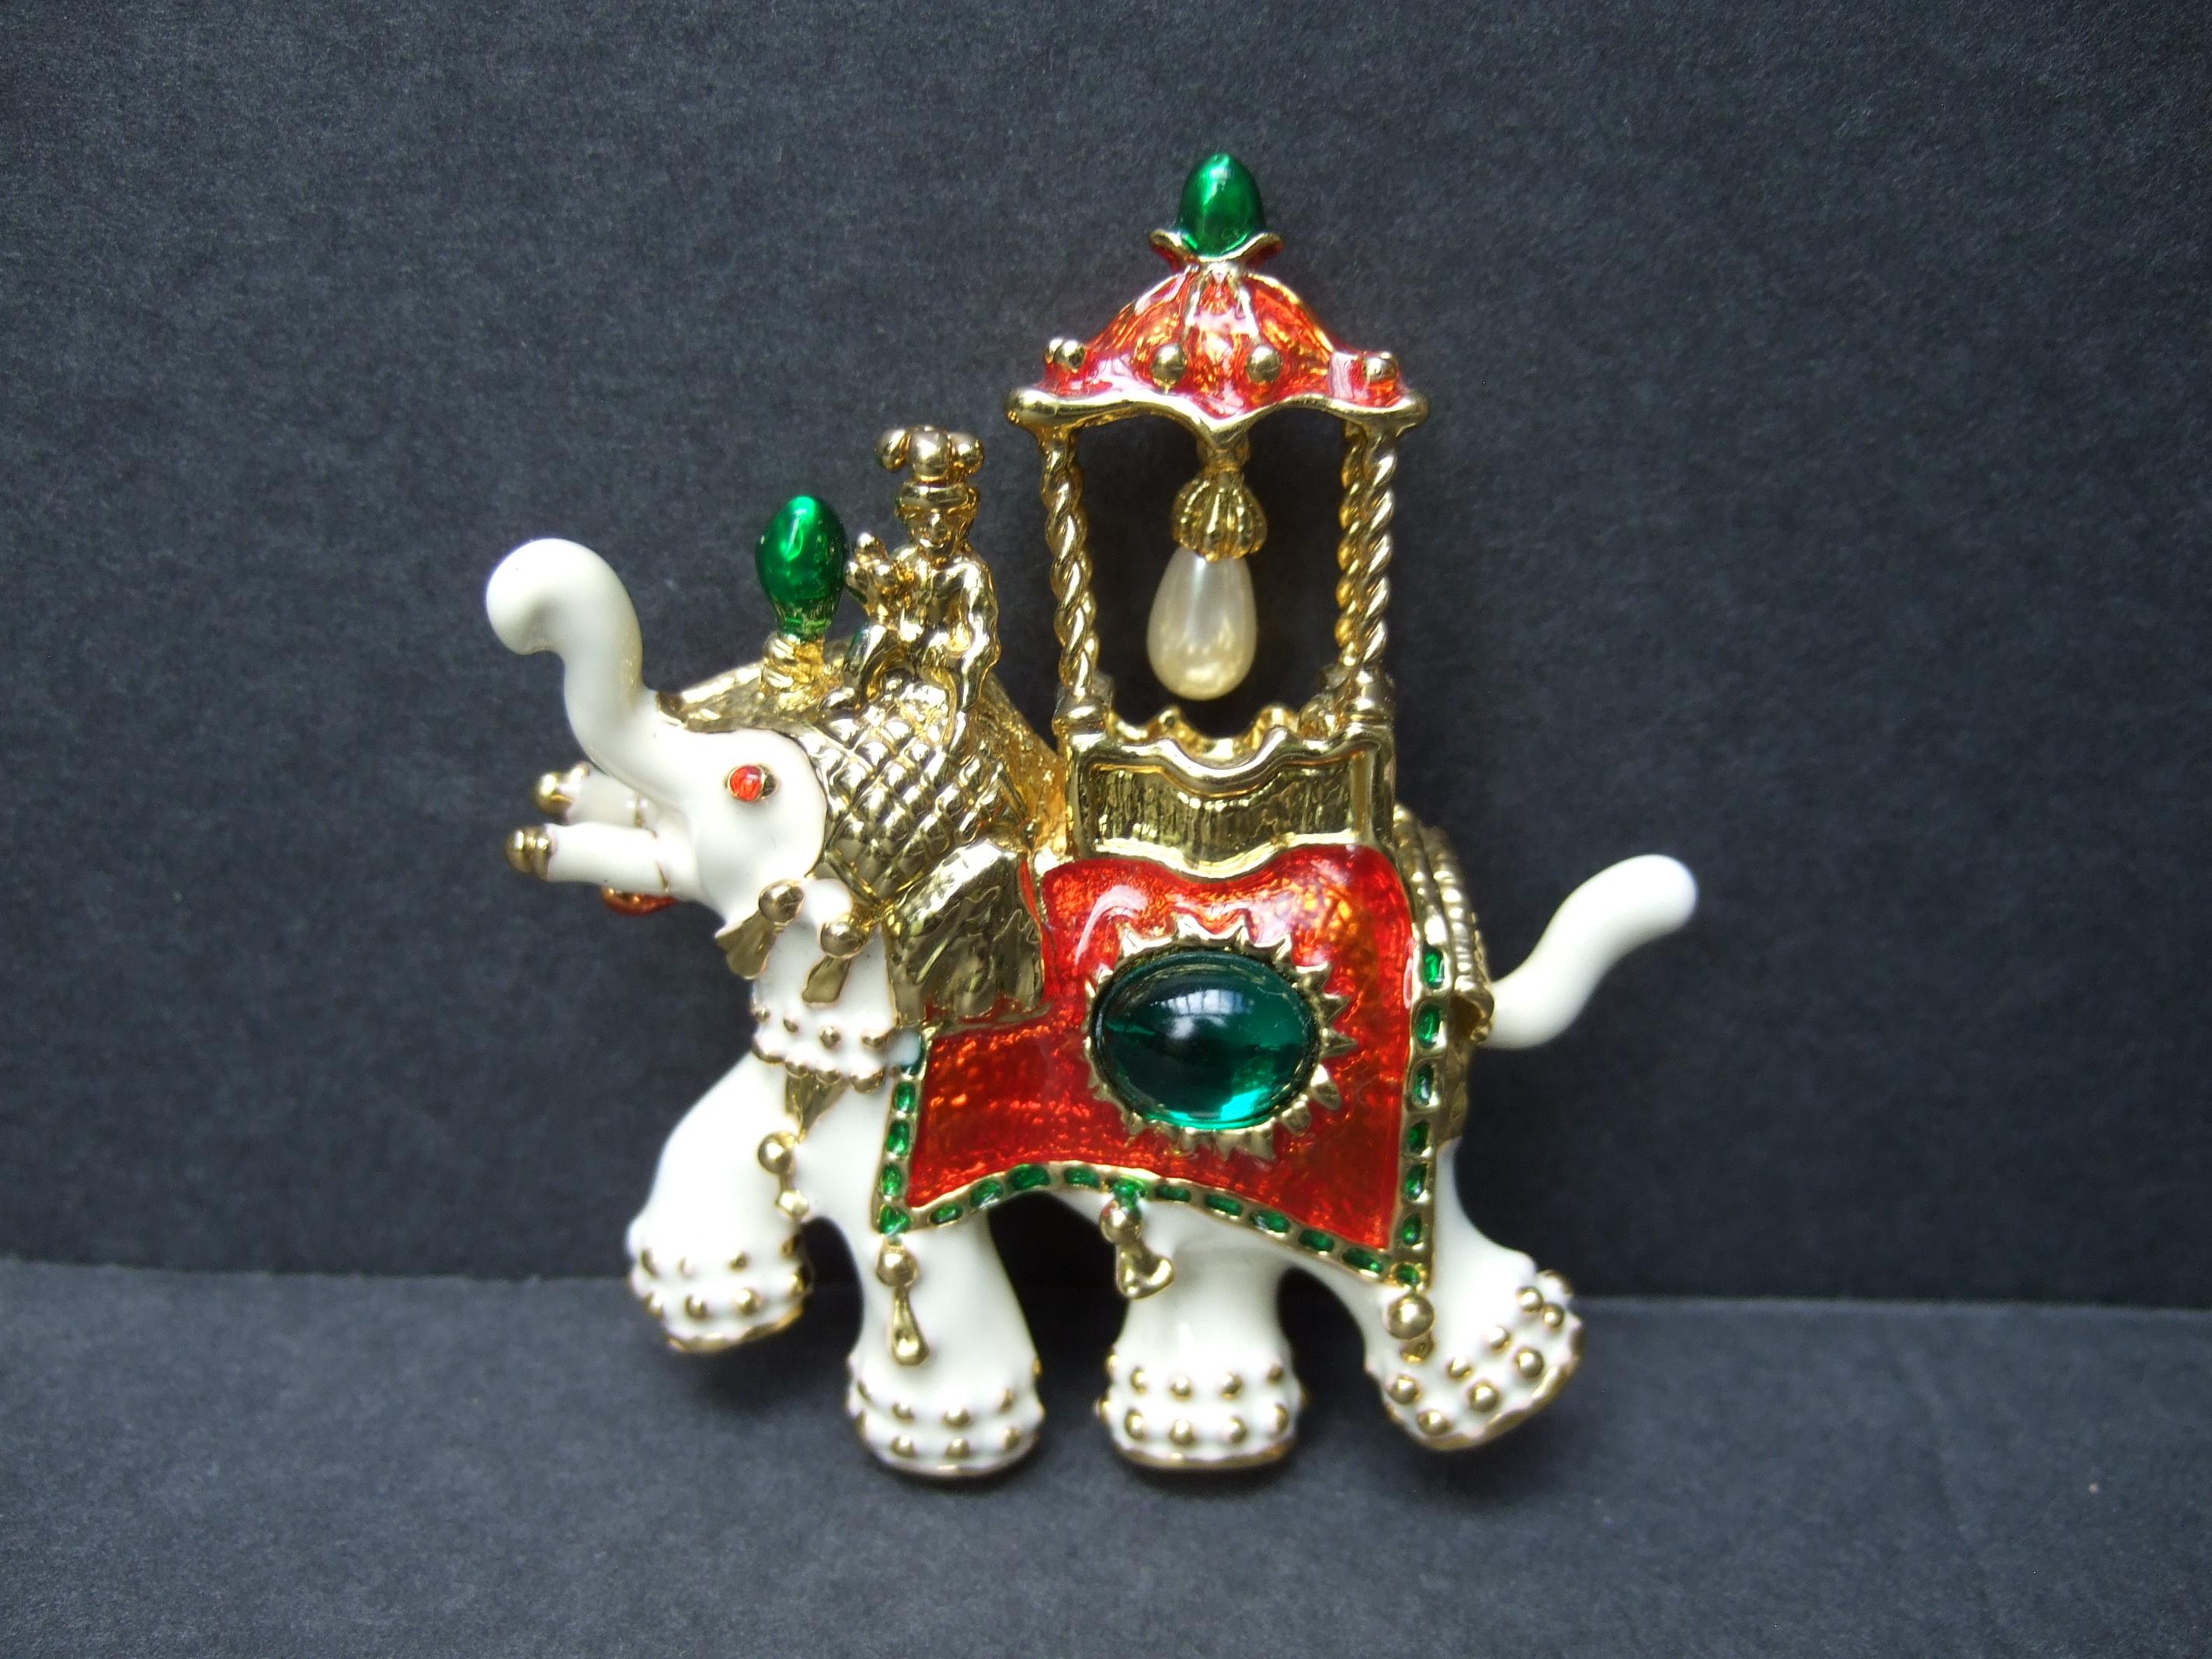 Exotic gilt metal jeweled enamel elephant brooch c 1990s
The unique gilt metal brooch is lacquered in creamy white enamel 
Adorned with an emerald green resin cabochon in the center
Accented with a tiny dangling resin enamel pearl 

A small gilt